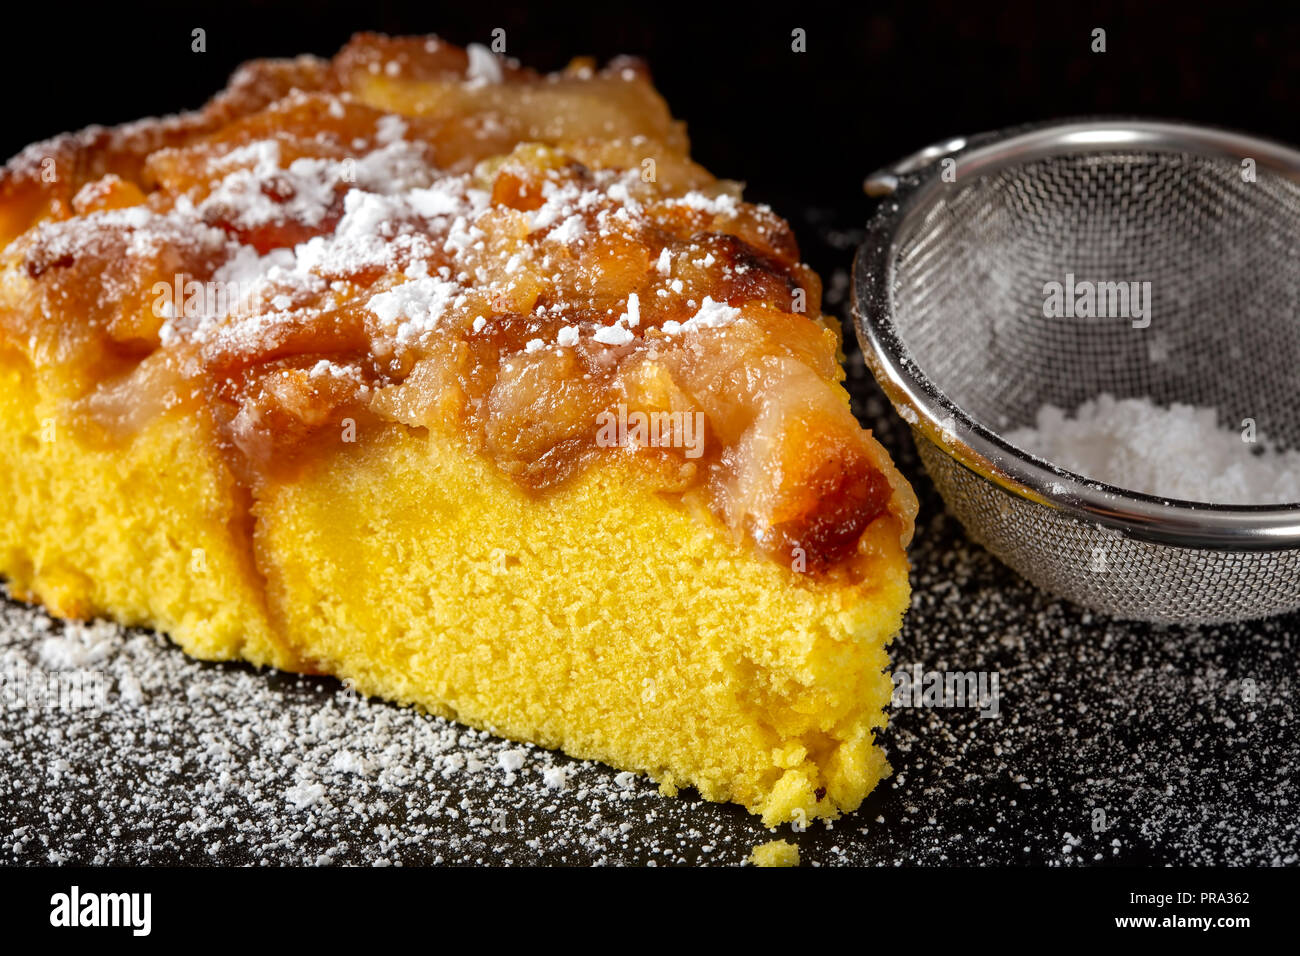 One slice of an apple cake with powder sugar - close up view Stock Photo